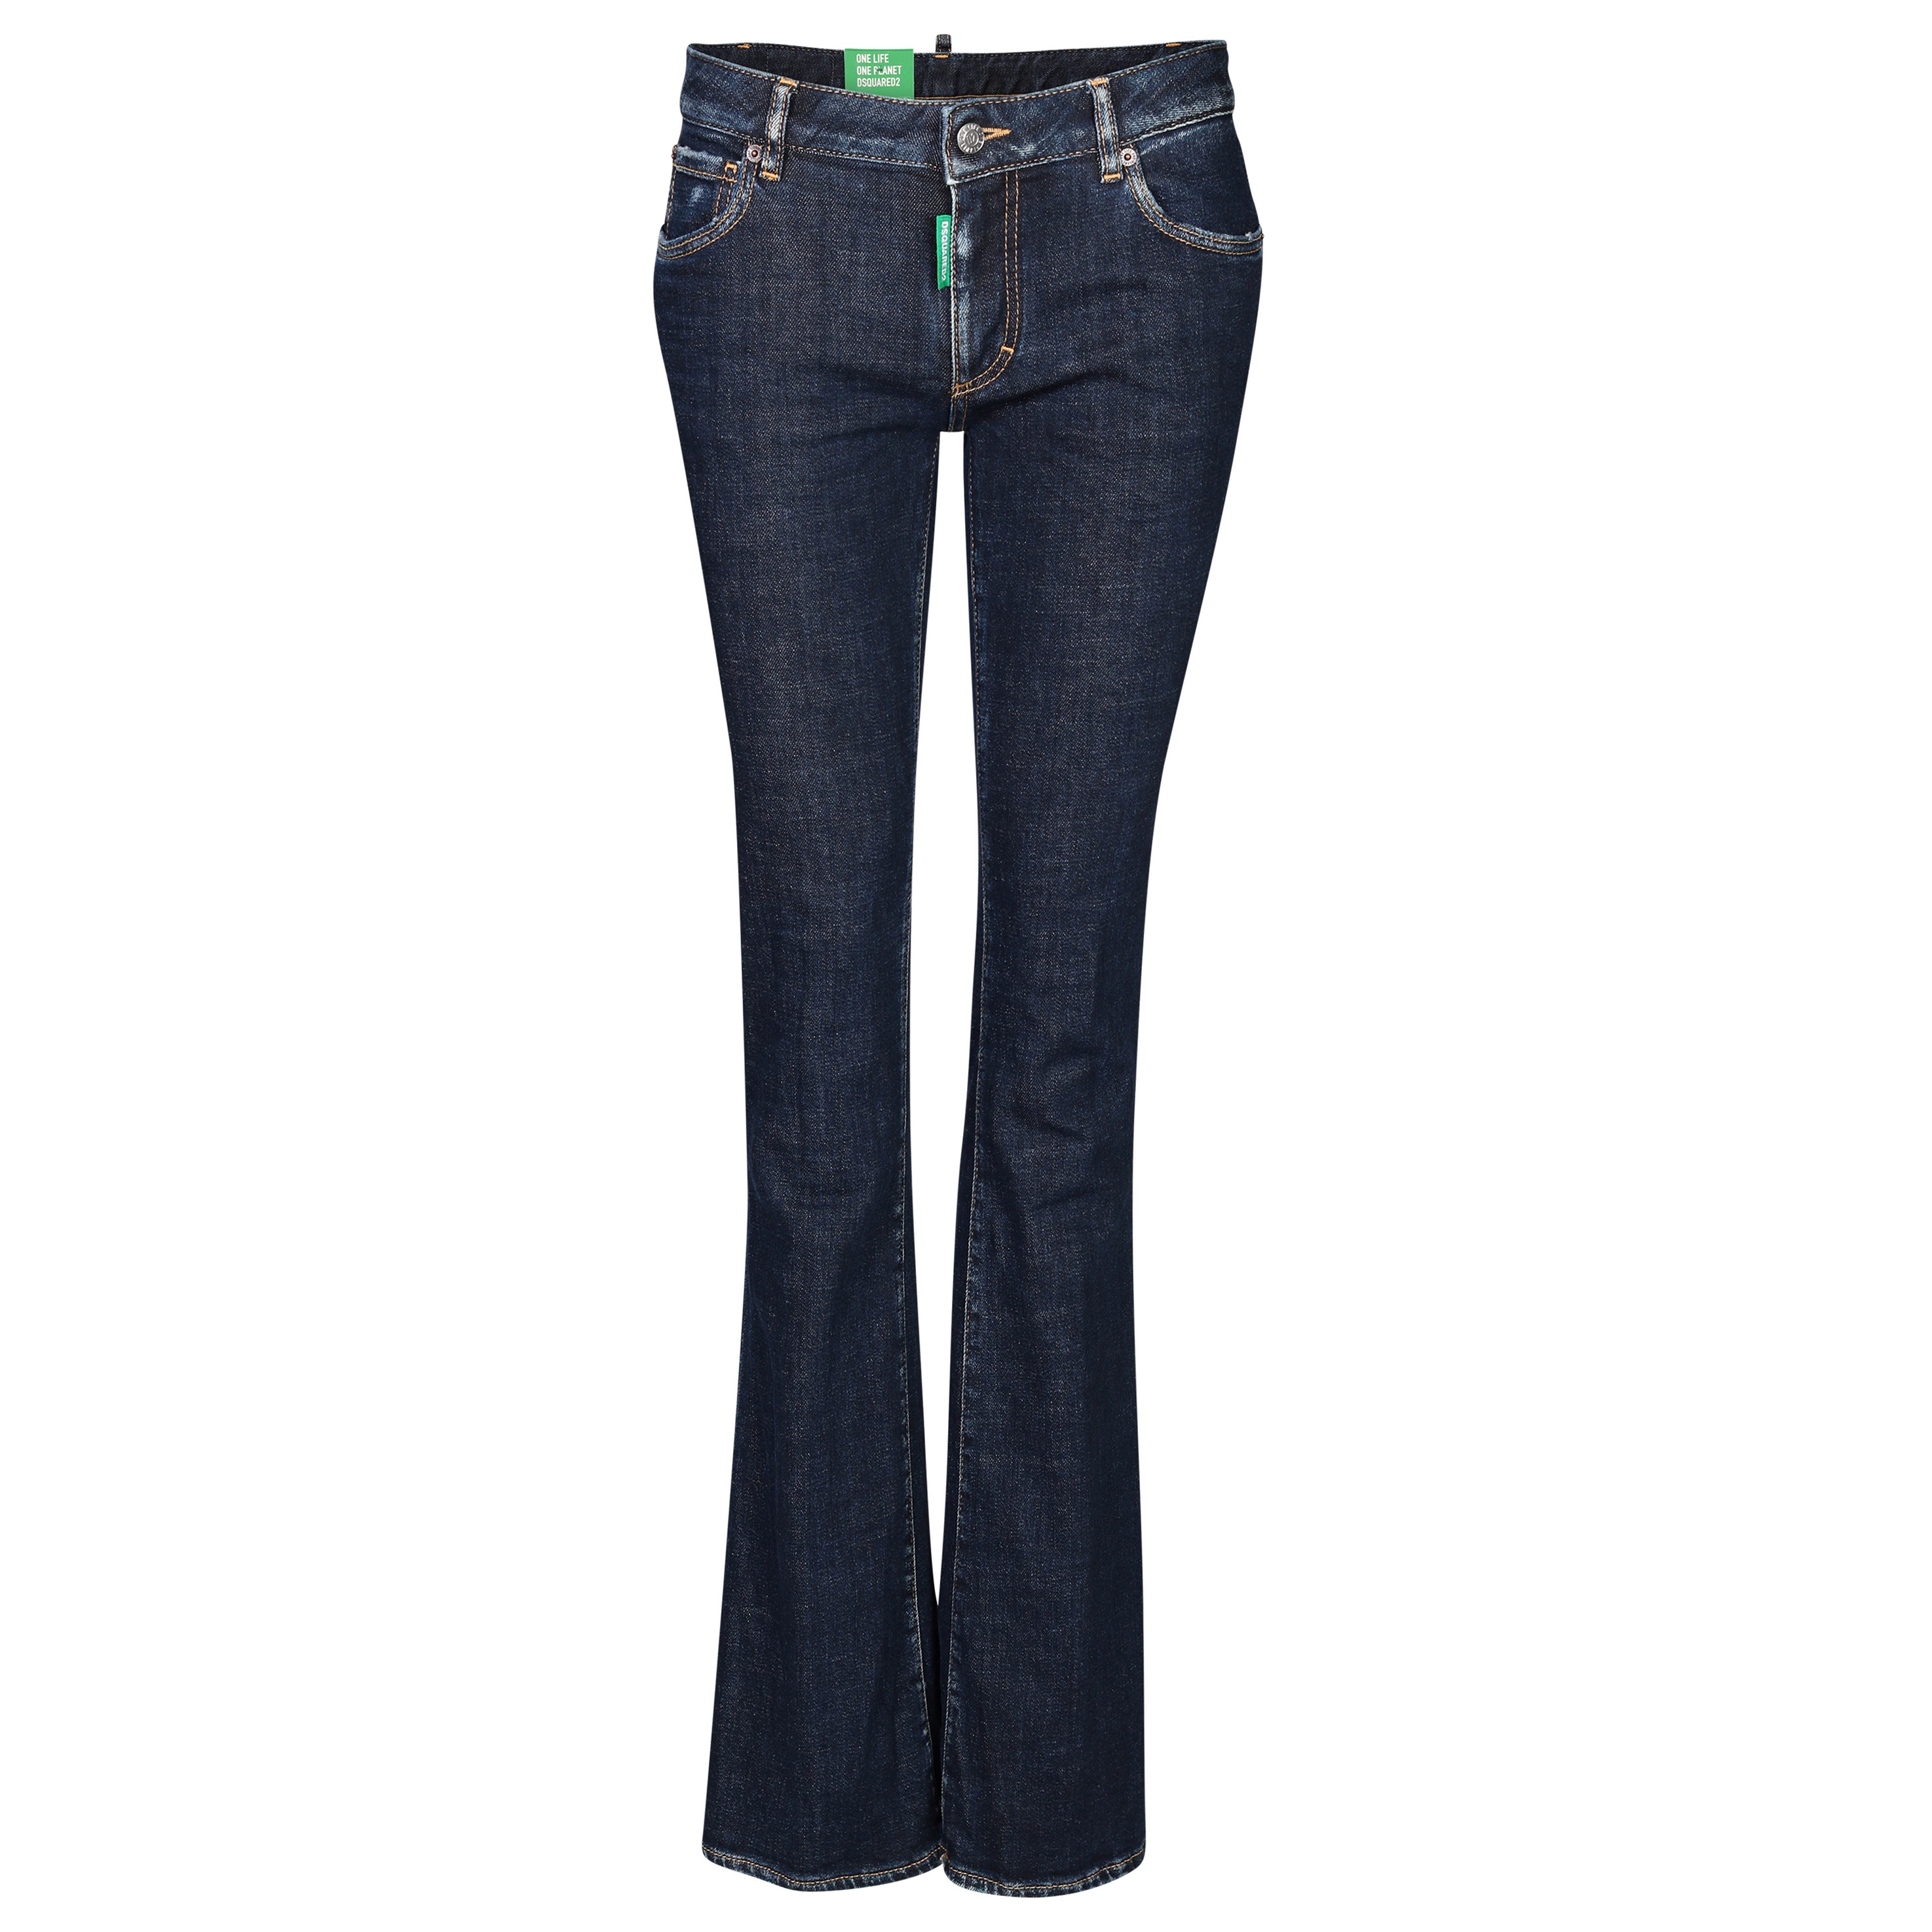 DSQUARED2 Green Label Mid Waist Flare Jeans in Dark Blue